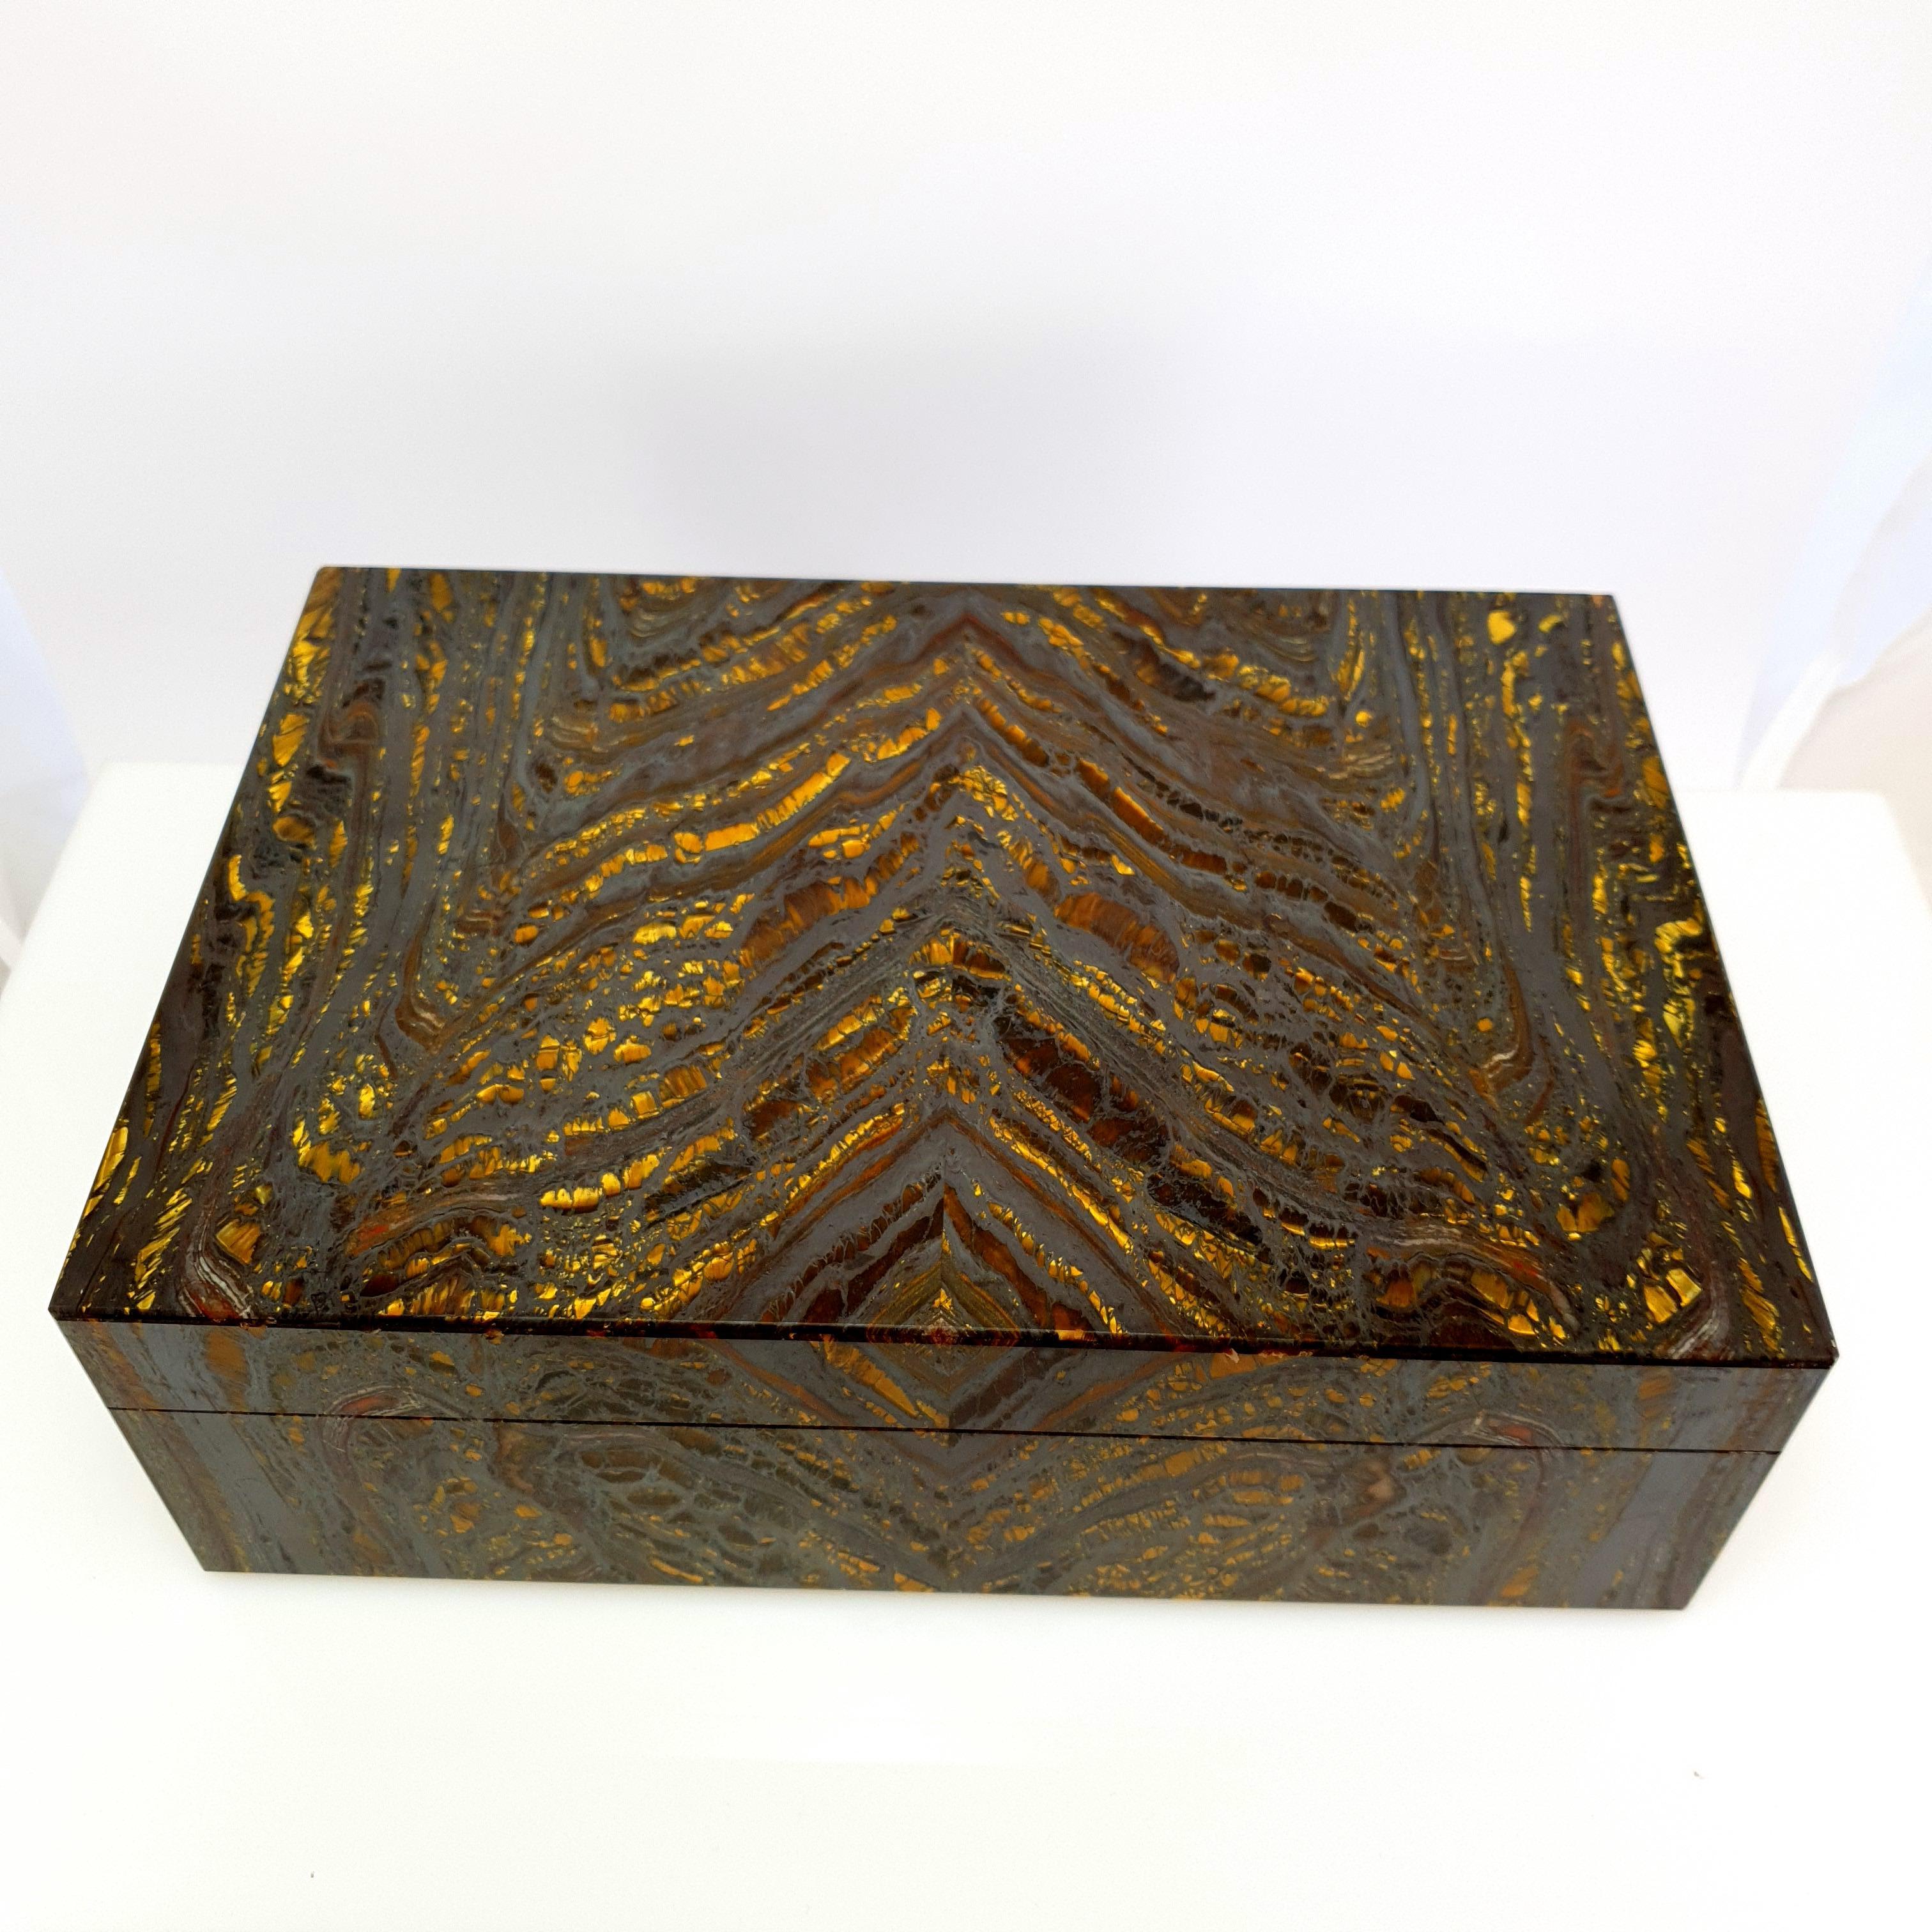 A Natural Handmade Gold brown Tiger Iron Decorative Jewelry Gemstone Box with black Marble Inlay.
The golden brown colour stripes and pattern looks like an artful painting of nature. 
It should be emphasized that the top and bottom plate is made